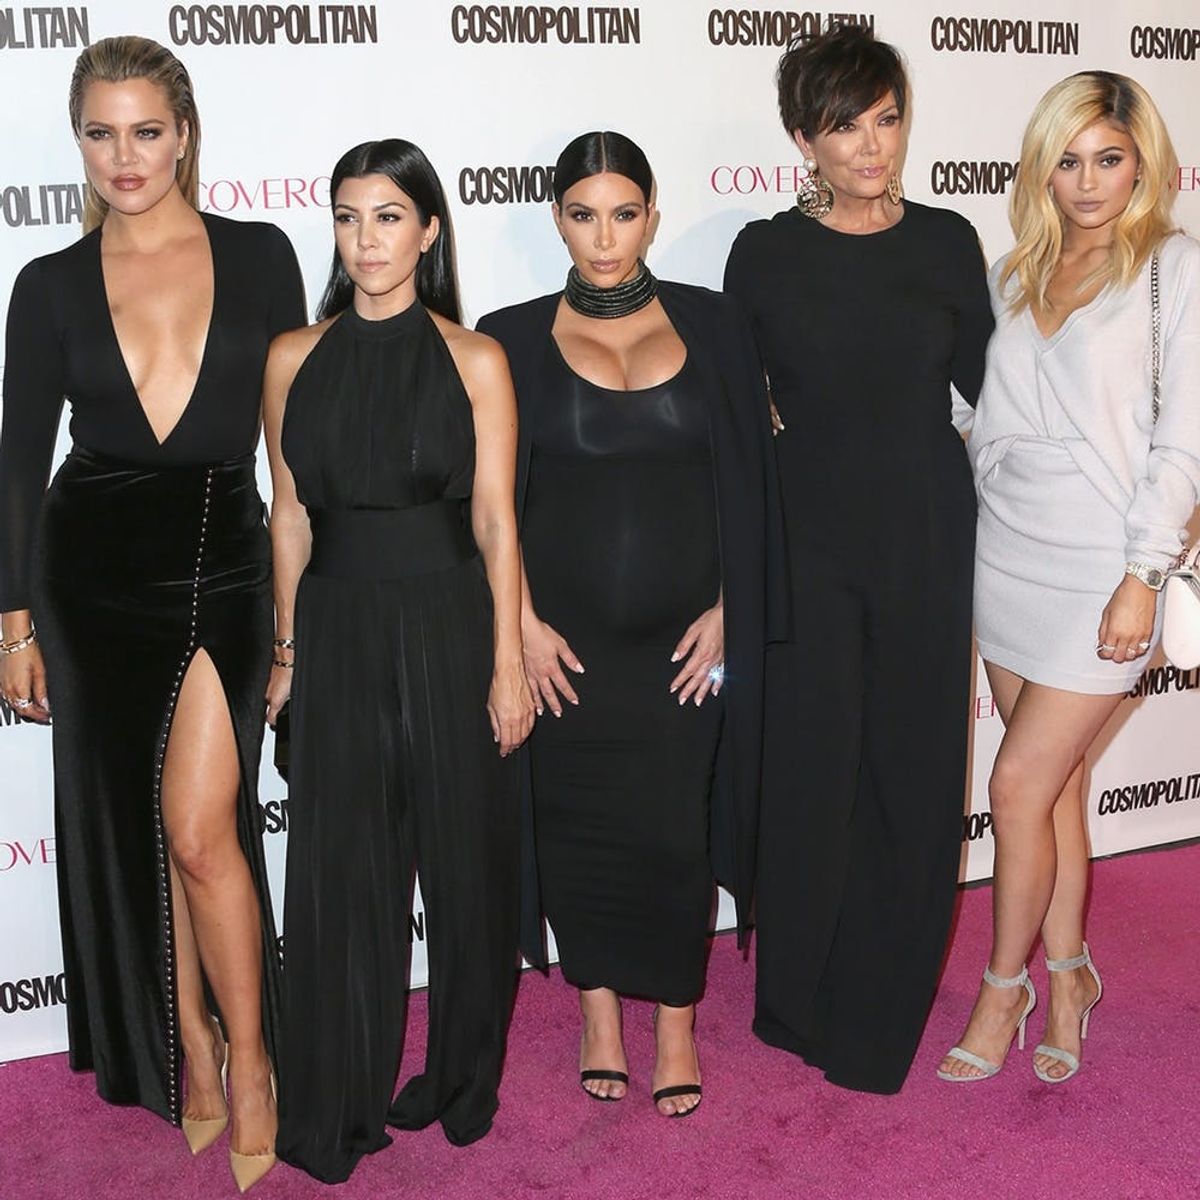 The Kardashian Family’s 2015 Christmas Card Might be Their Best One Yet